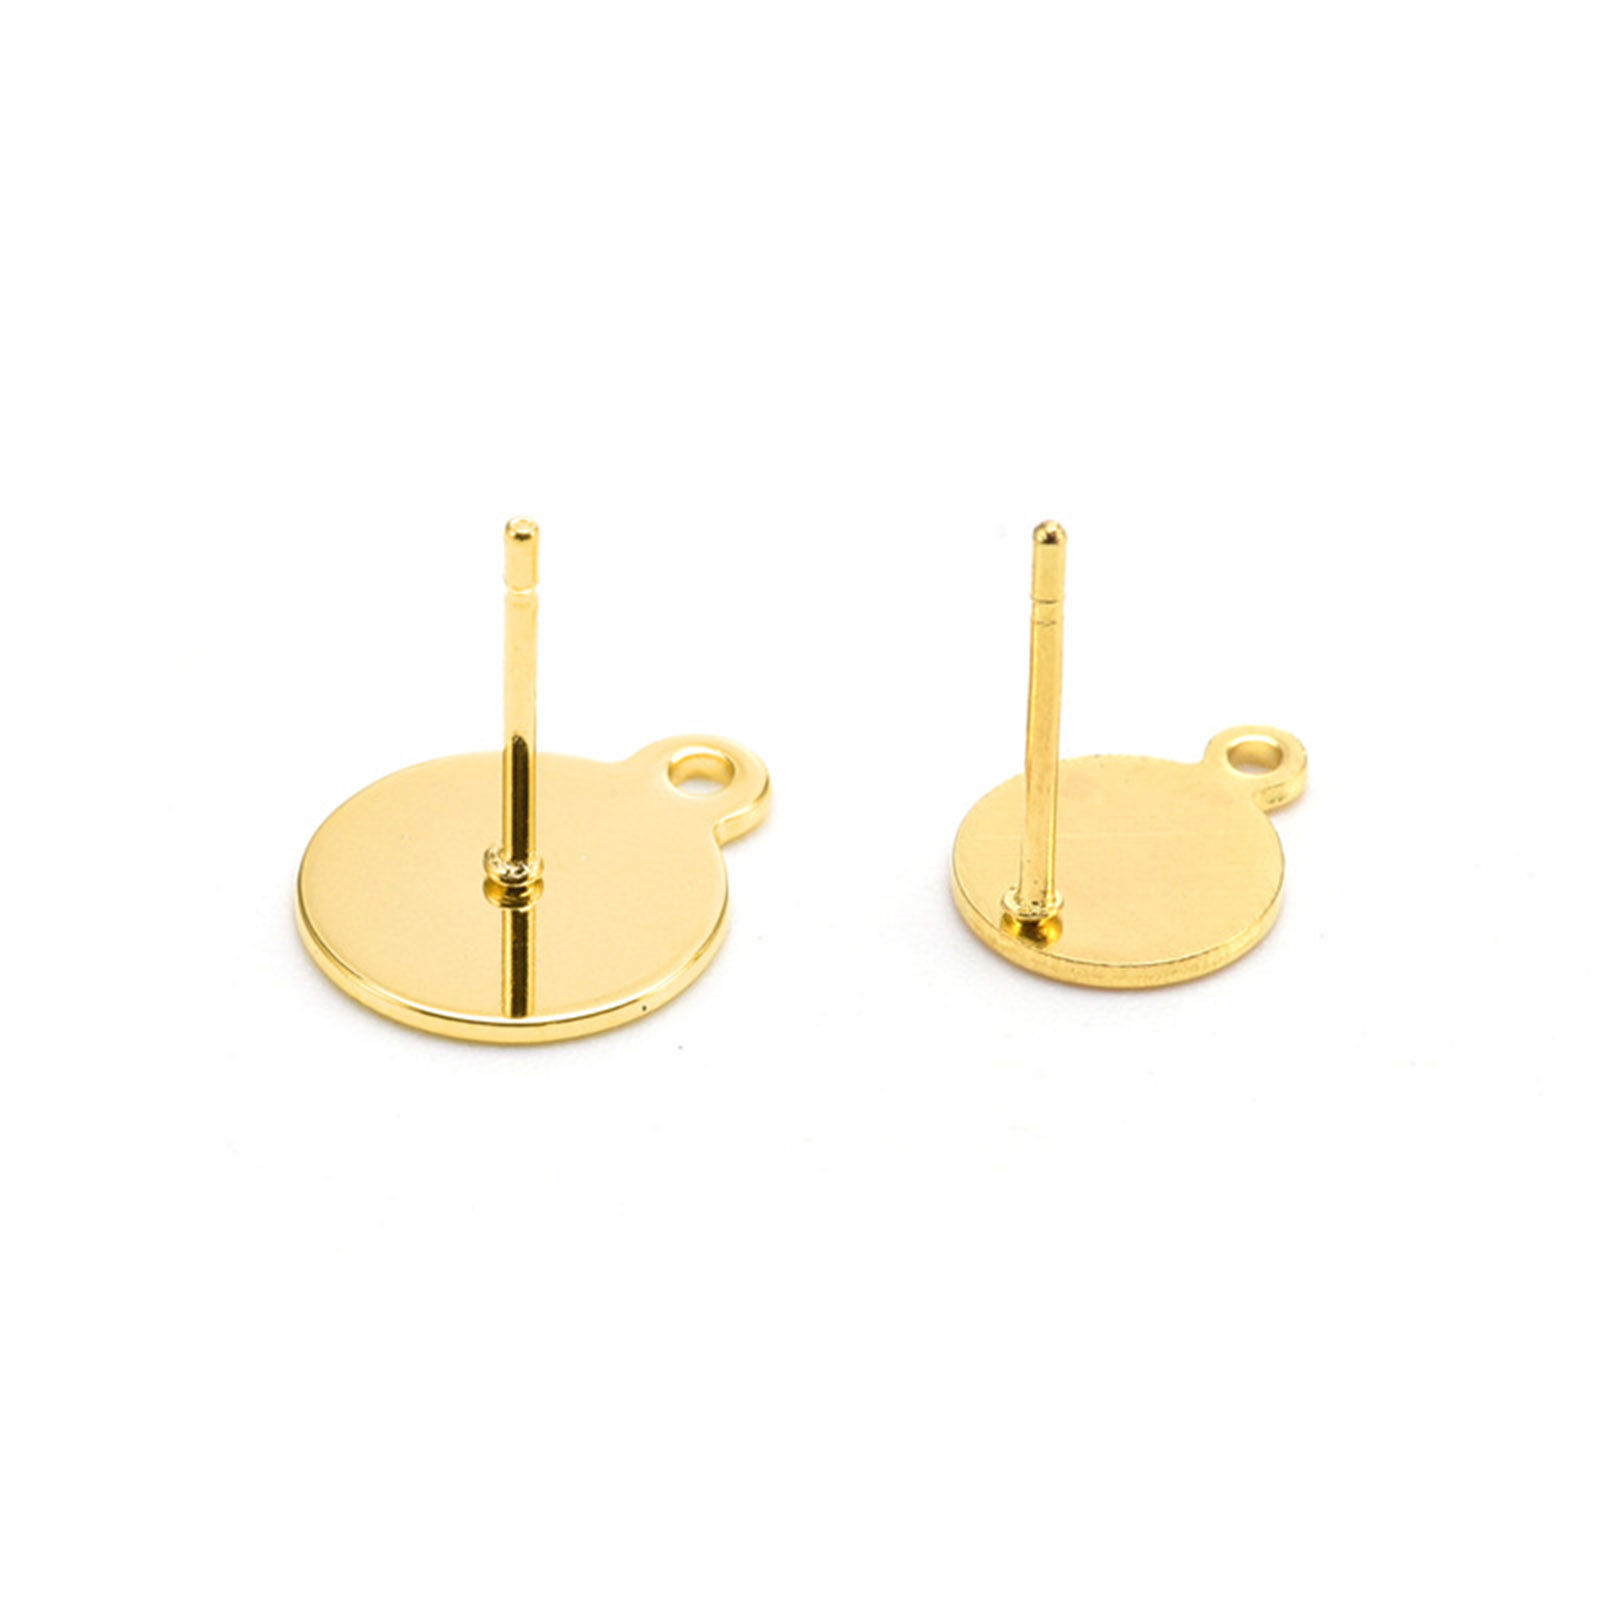 Picture of Stainless Steel Ins Style Ear Post Stud Earrings Round Gold Plated With Loop 8mm Dia., Post/ Wire Size: (20 gauge), 1 Piece